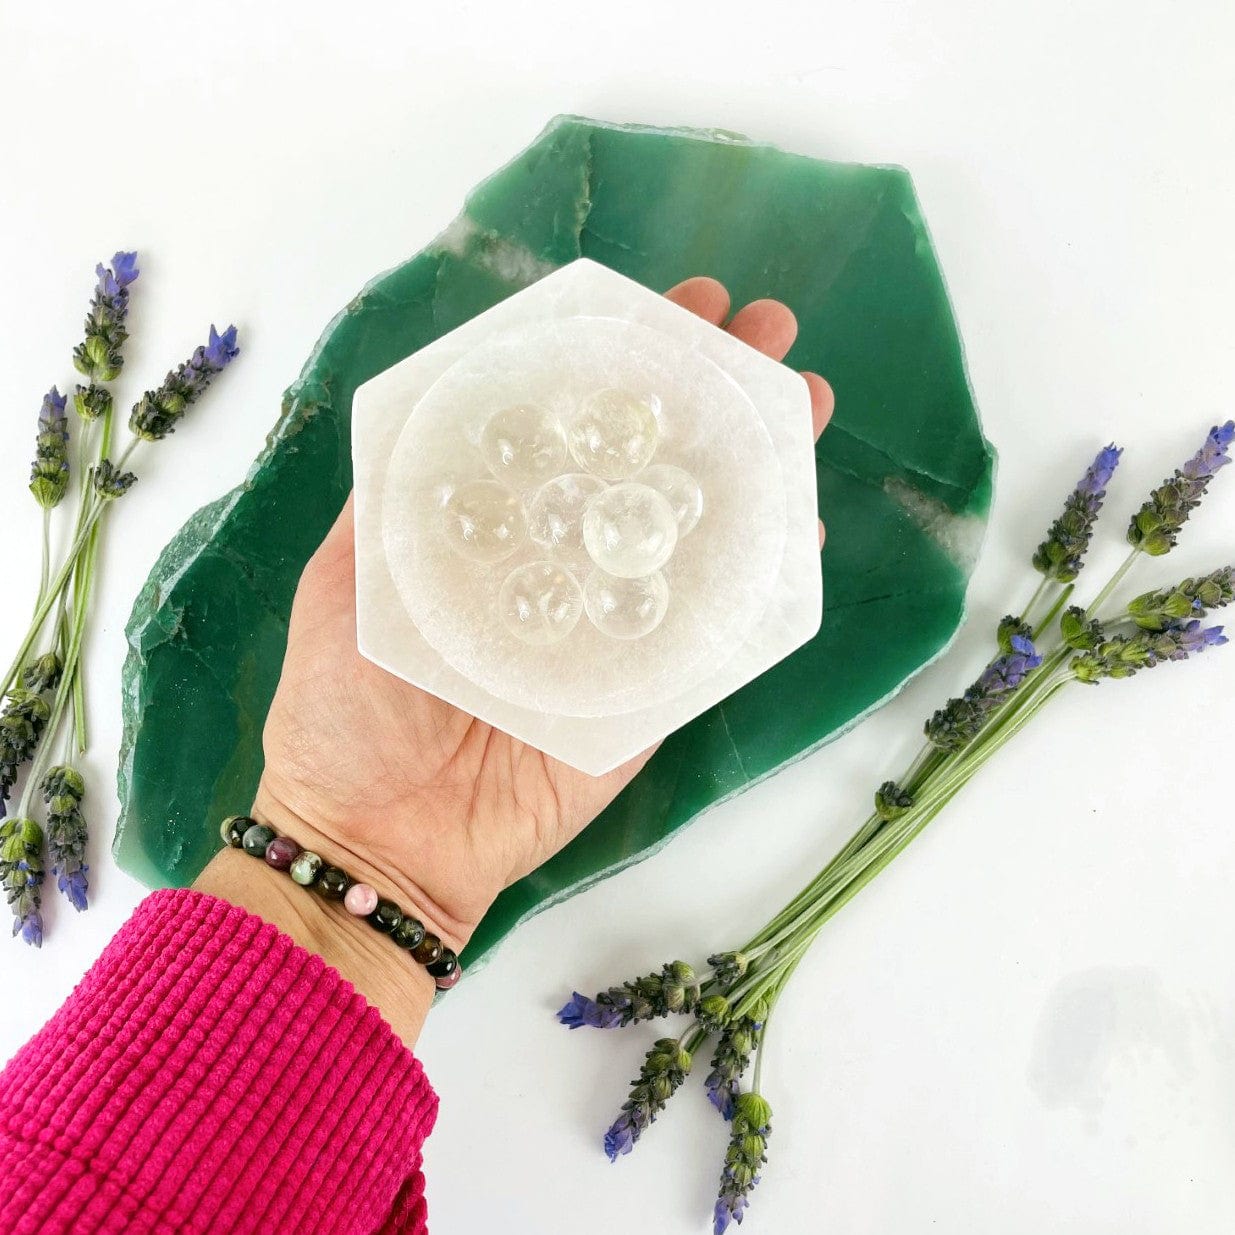 12 cm hexagon selenite bowl in hand for size reference